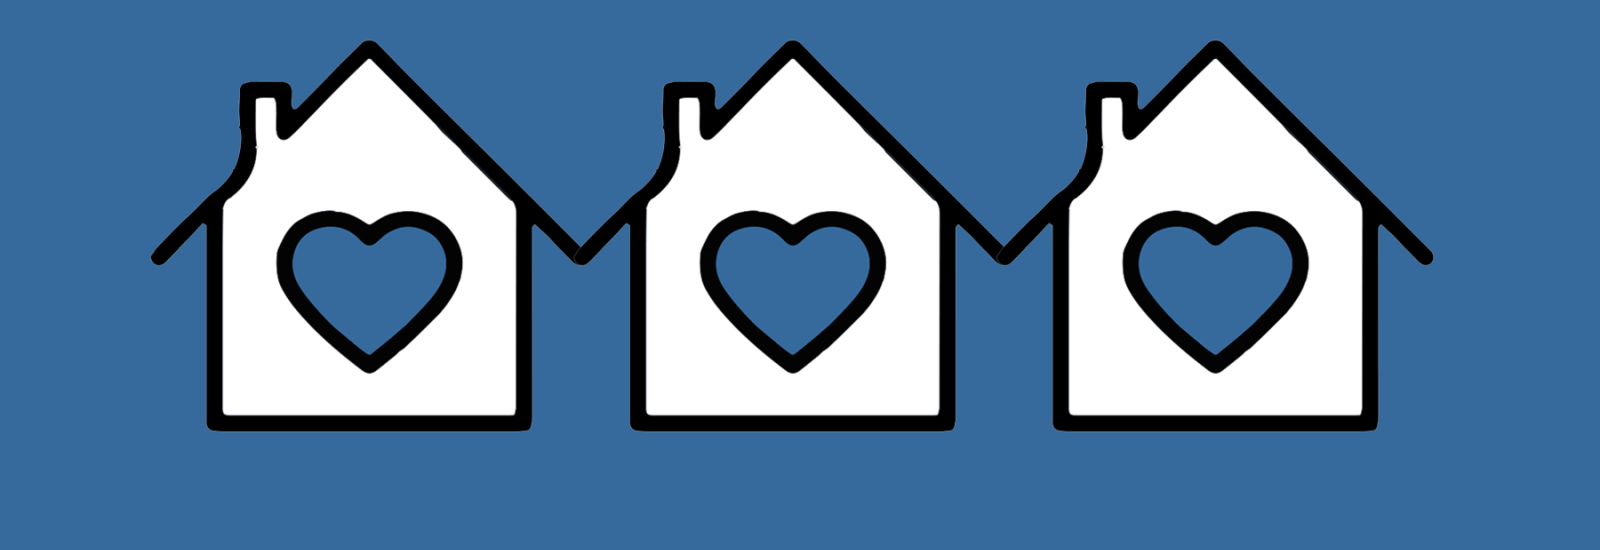 Blue rectangle with three white houses in a row all containing blue hearts